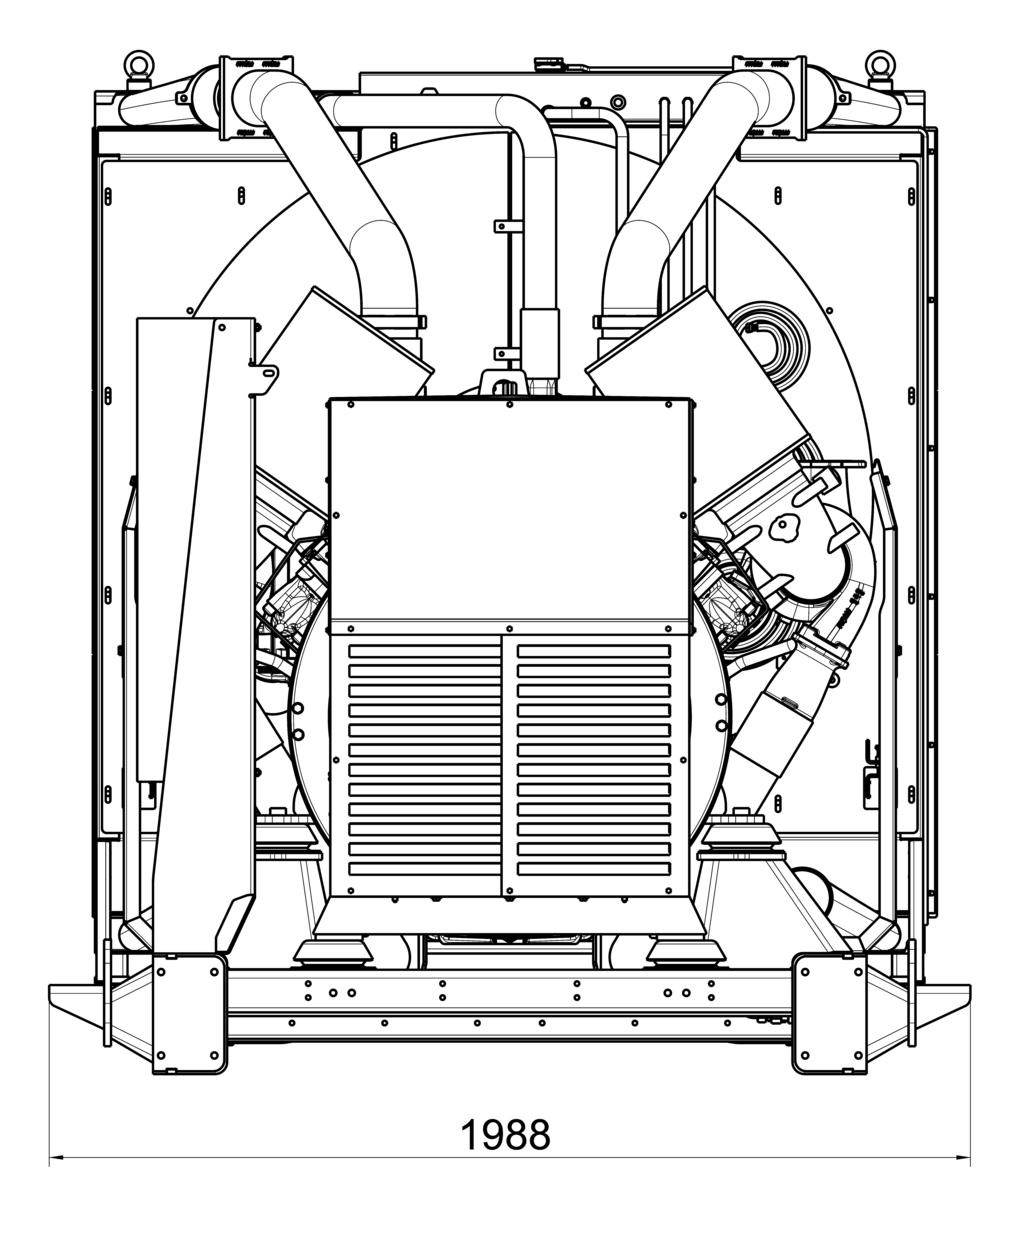 7 / // / MTU 16V2000 DS1000 / 3B / 50 Hz / 380V - 415V Weights and dimensions Drawing above for illustration purposes only, based an standard open power 400 Volt engine-generator set.